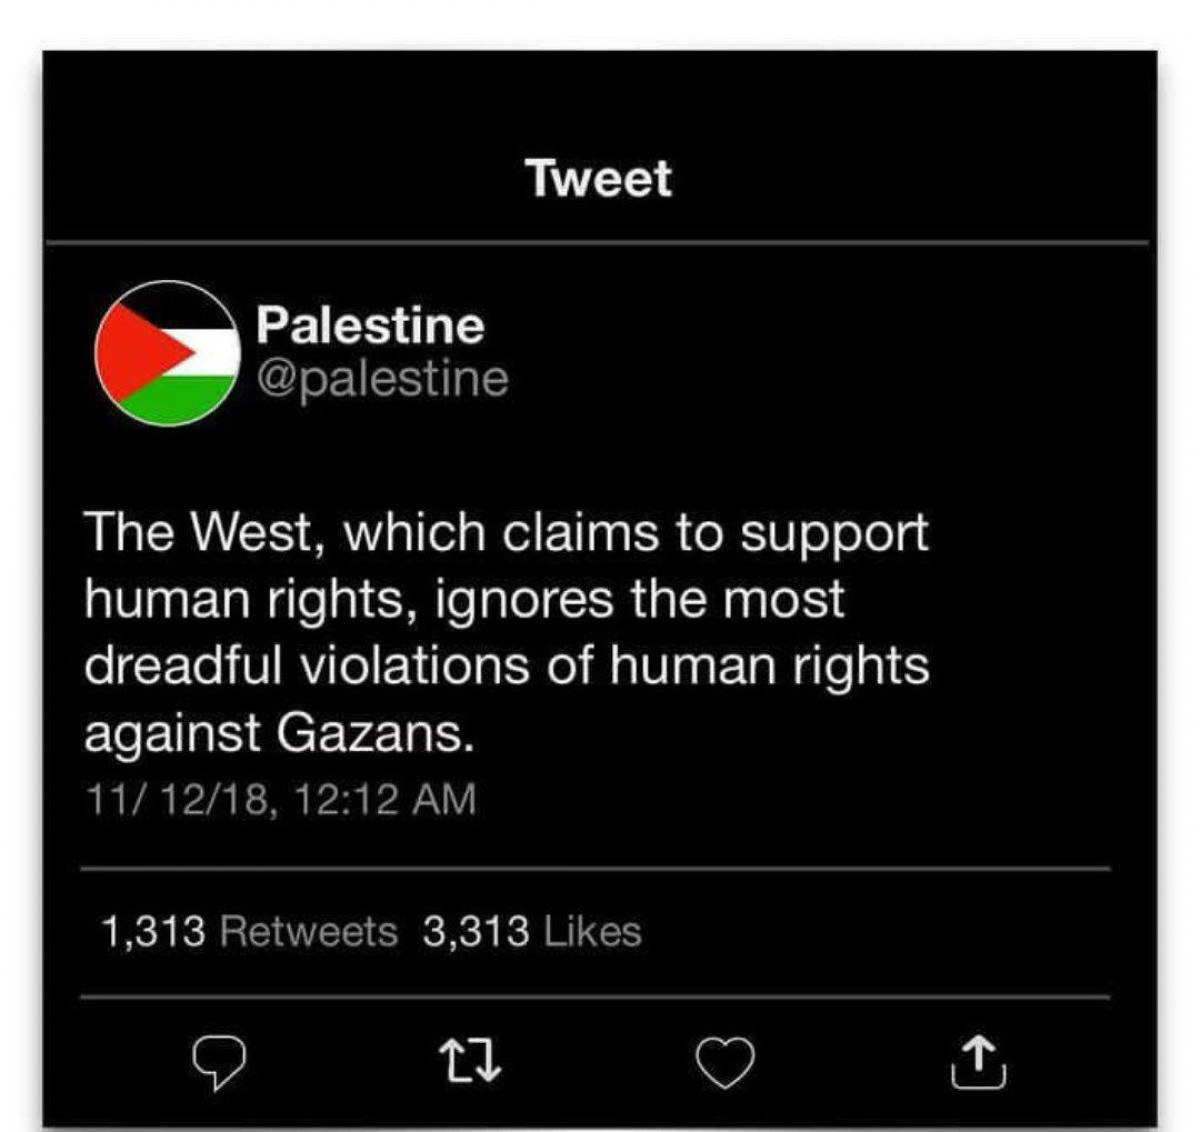 The West, which claims to support human rights, ignores the most dreadful violations of human rights against Gazans